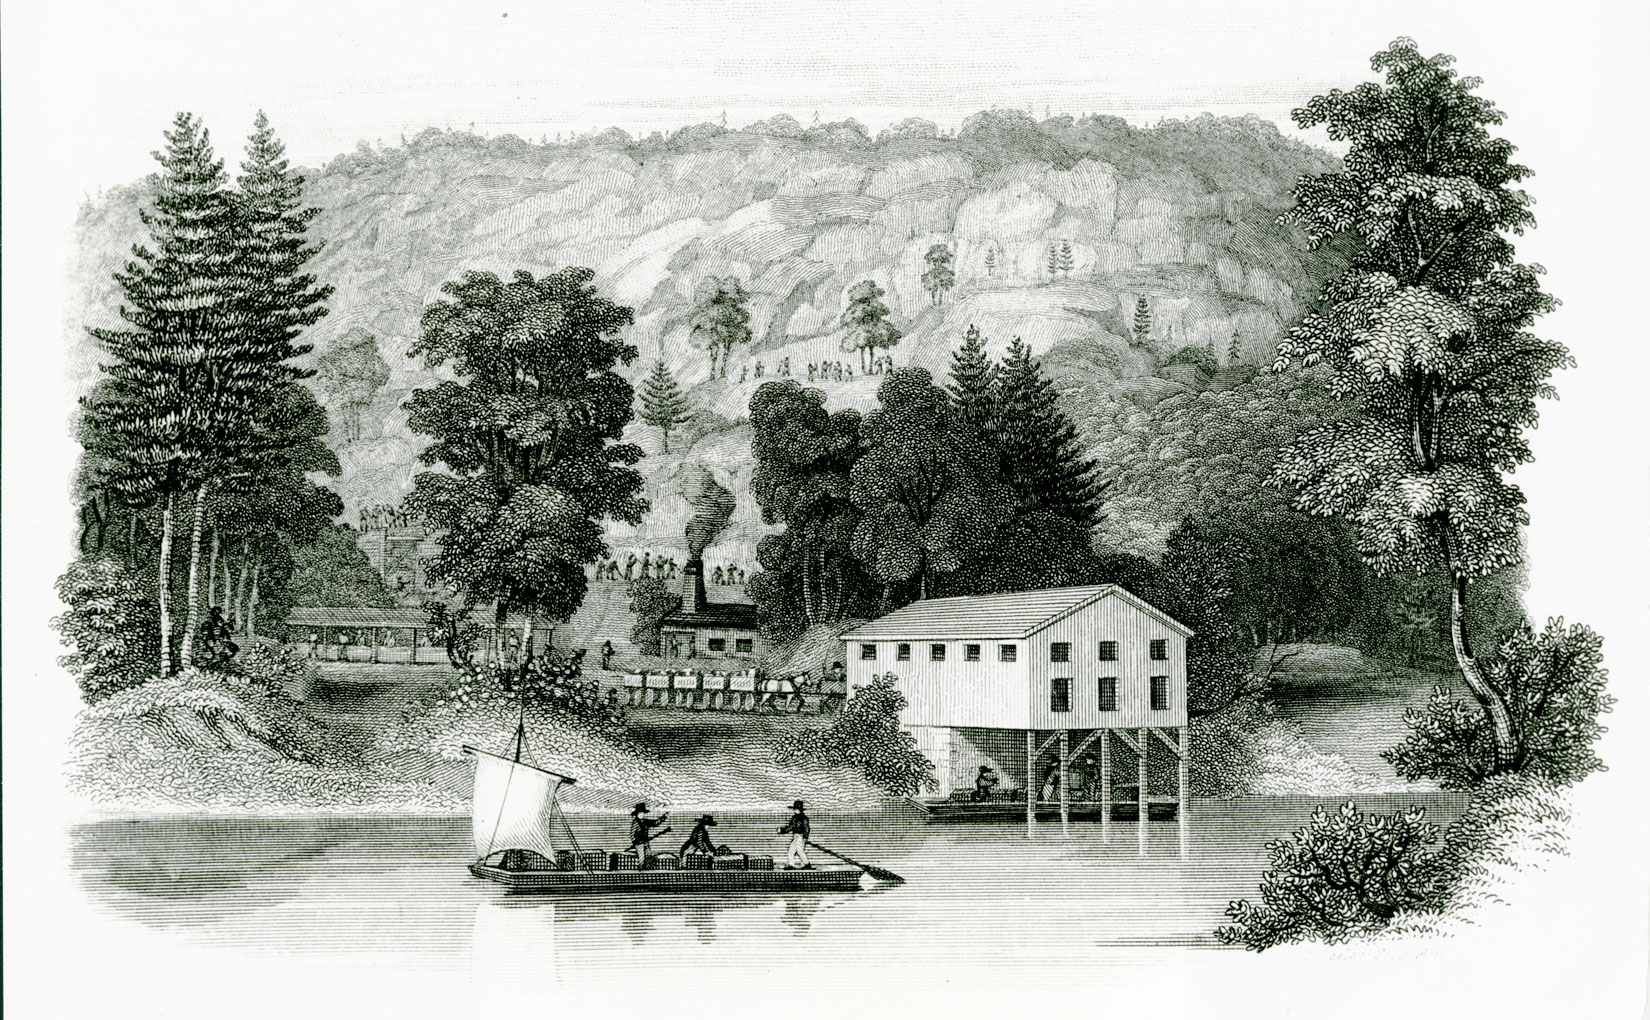 In a drawing of rural woodlands on a river, a boat propelled with setting poles and sail approaches a building. The building is set above the river so that there is a landing dock on the river under it. There are three figures on the boat and several others throughout the scene, some on a small road and some in a field. The scene shows large trees and bushes next to the river, and smaller ones throughout the landscape up a hill. There is also a small road with a few buildings on it leading to the landing building. 